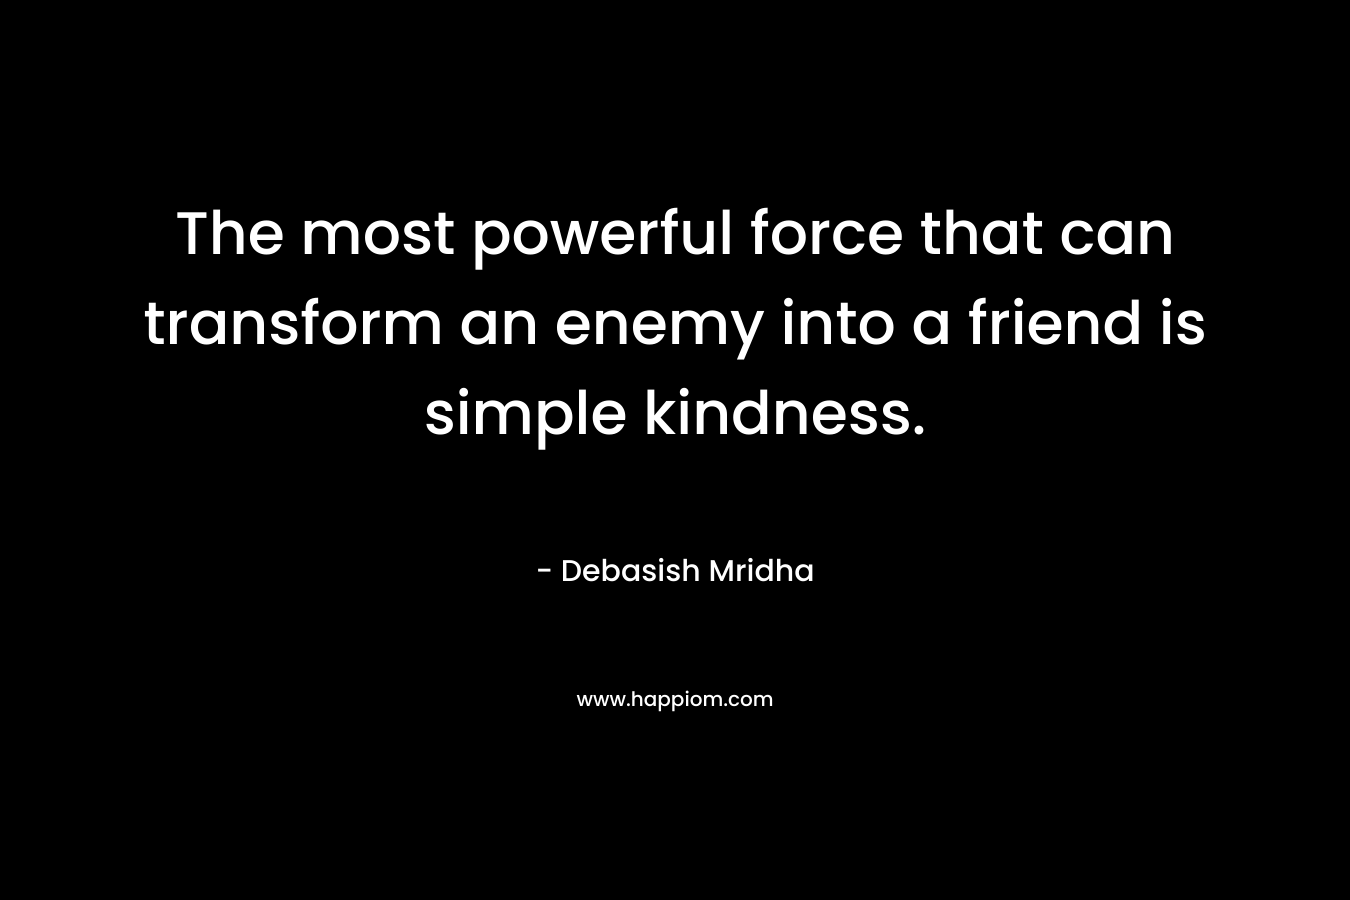 The most powerful force that can transform an enemy into a friend is simple kindness.